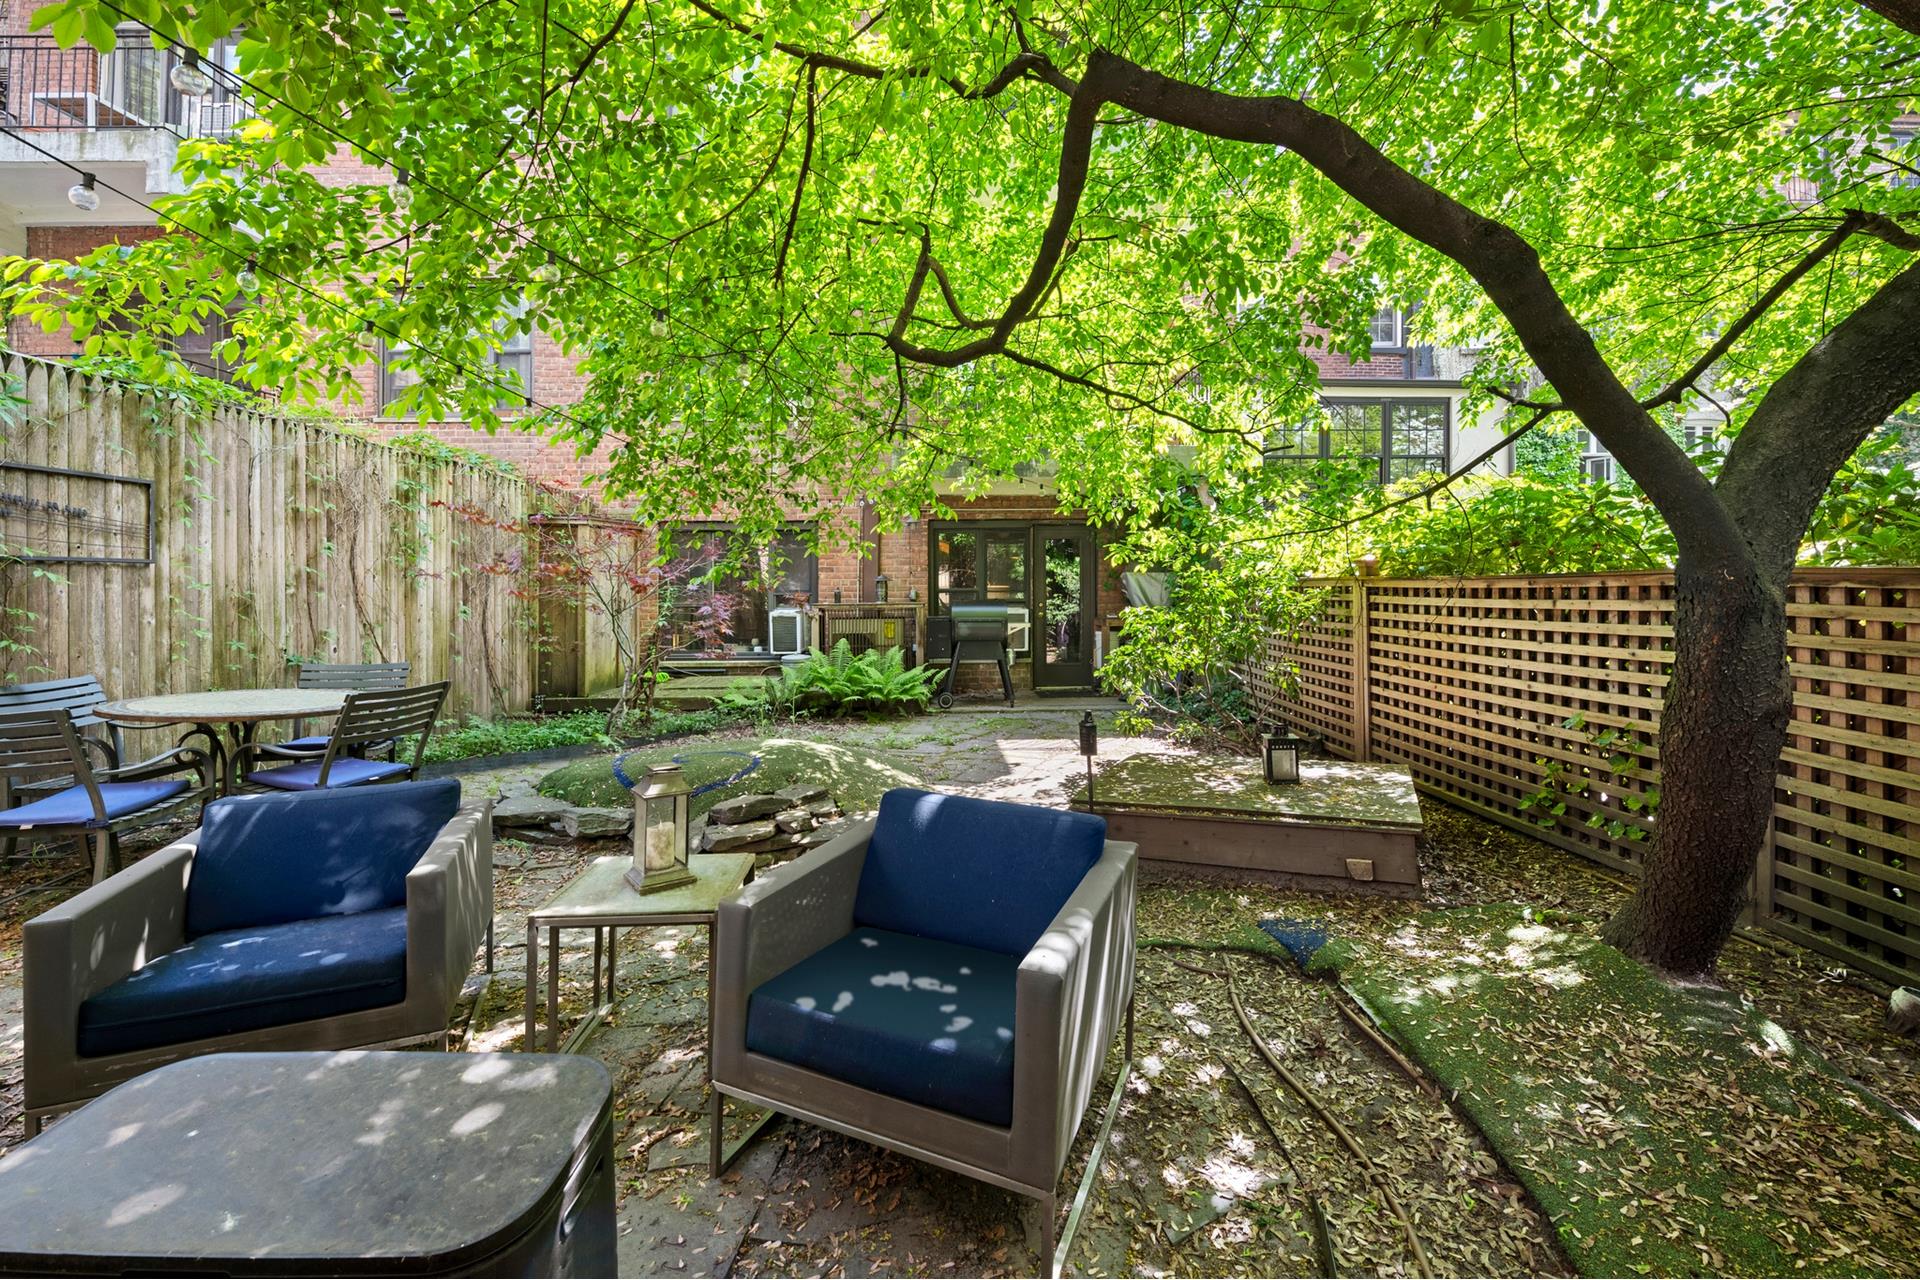 a view of backyard with outdoor seating and trees